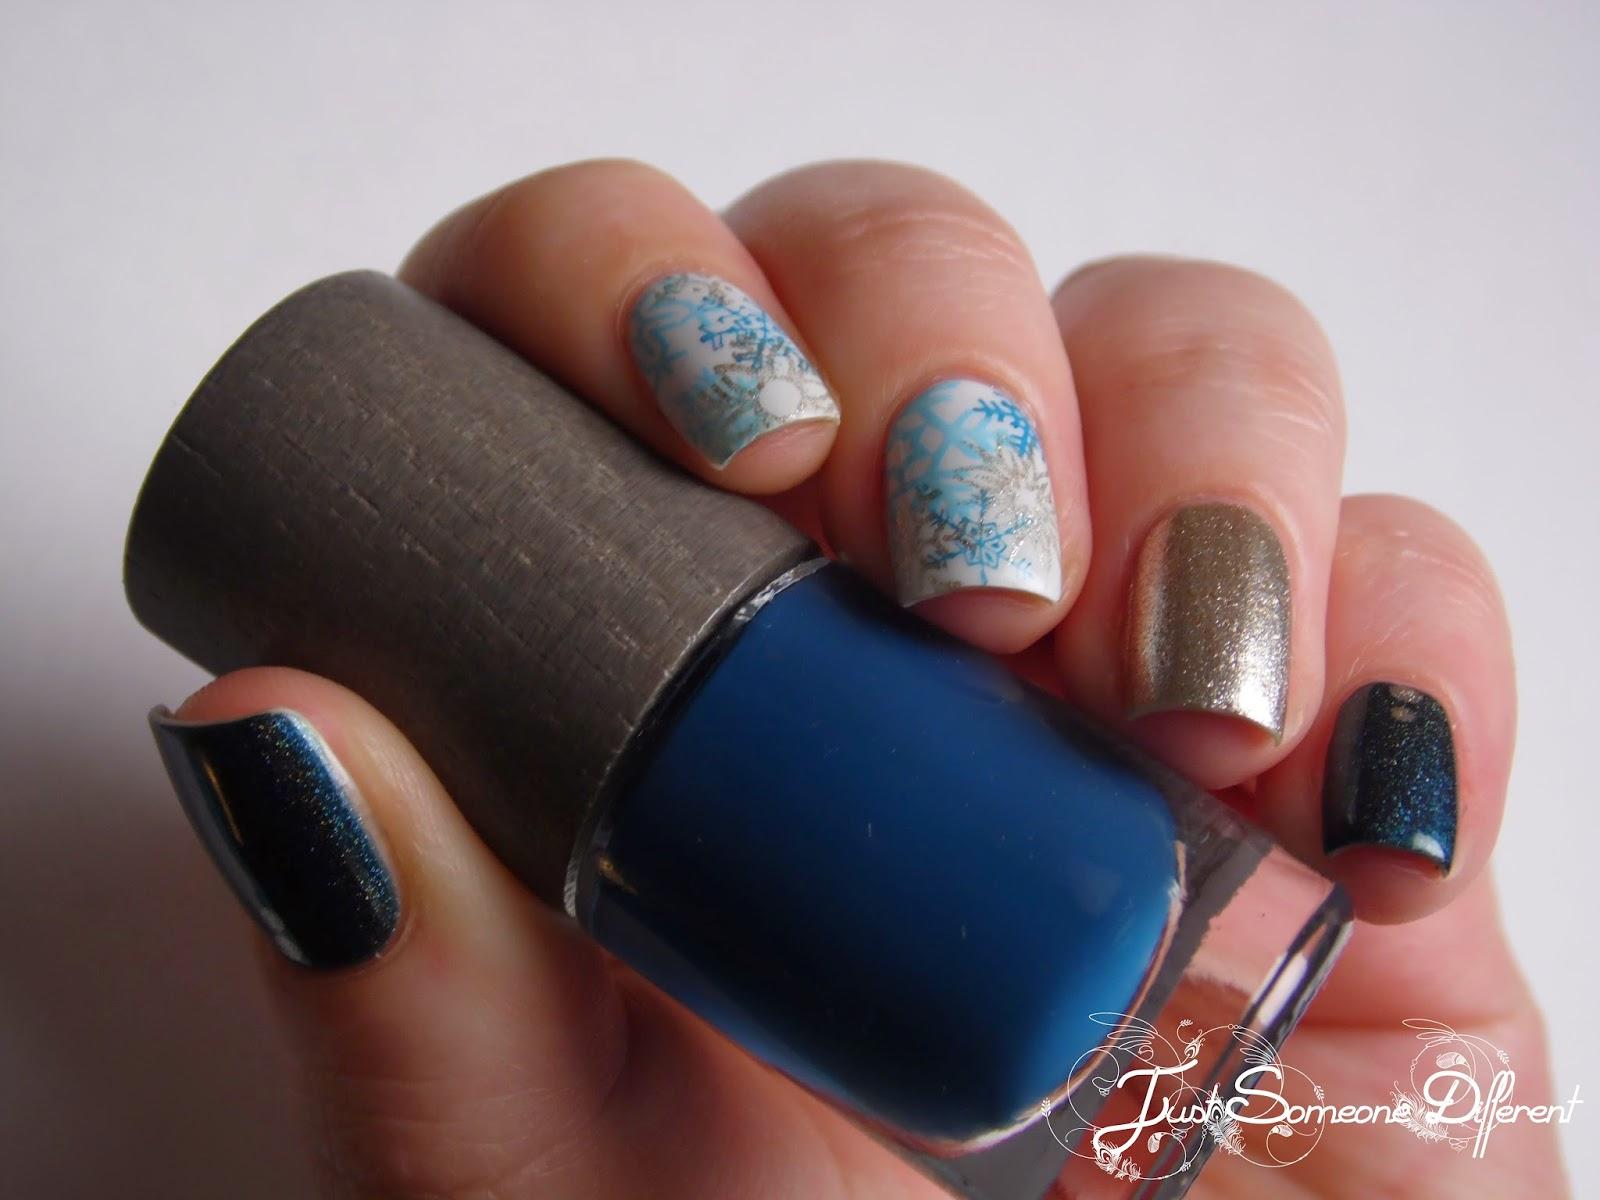 Winter nails #1: Icy snowflakes